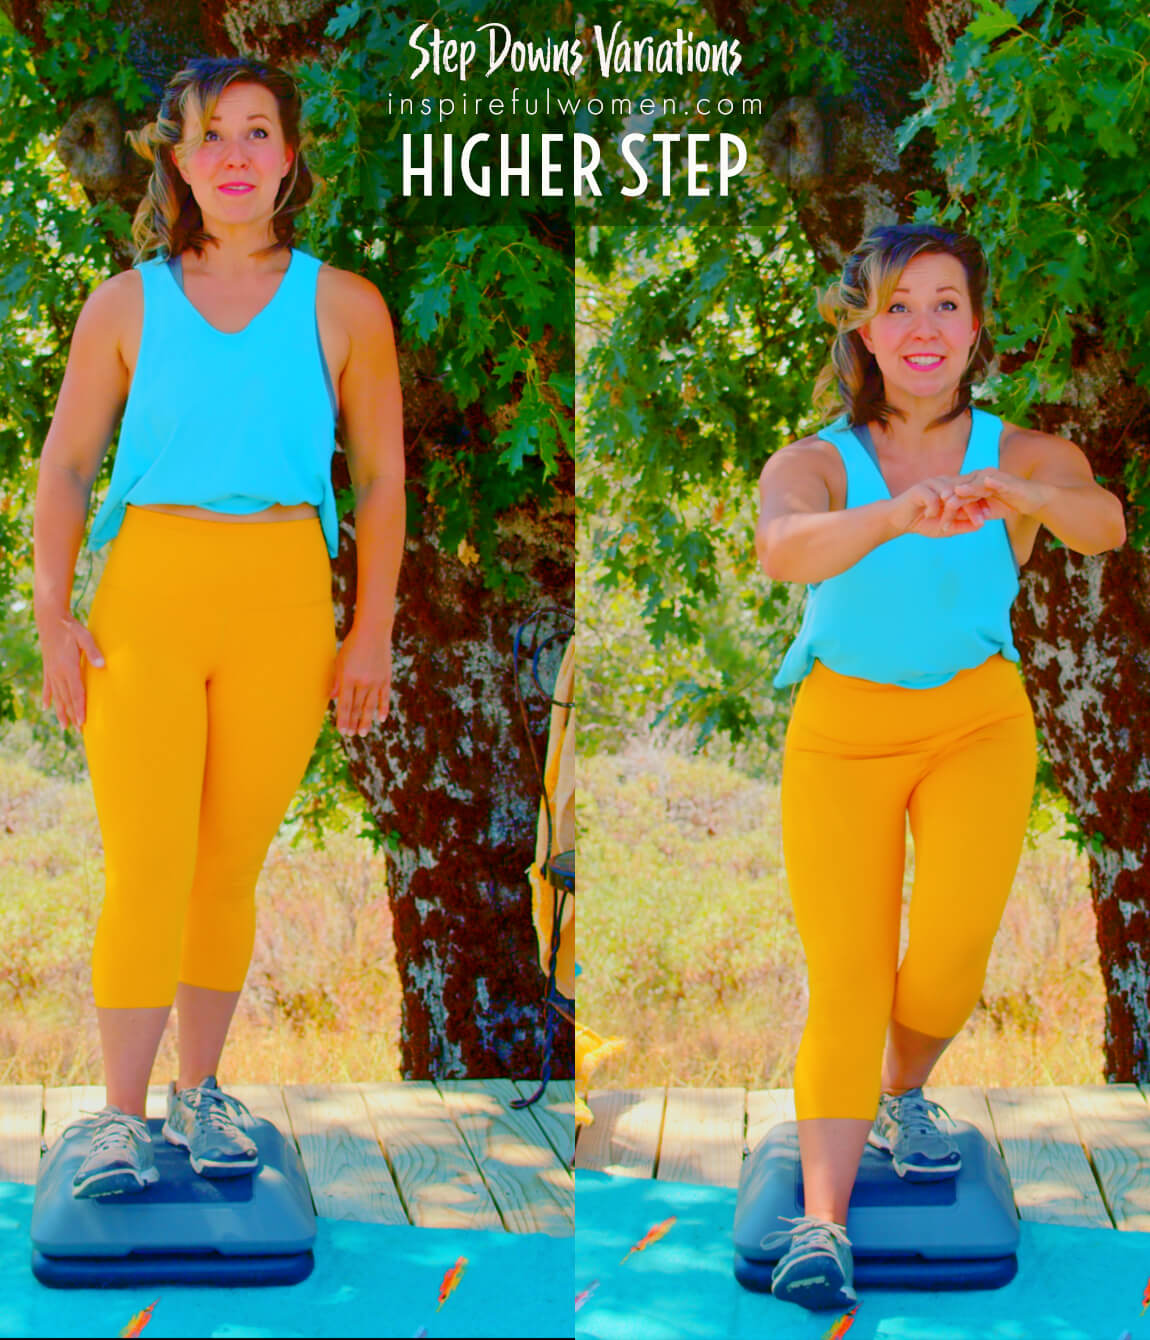 higher-step-front-box-step-downs-variation